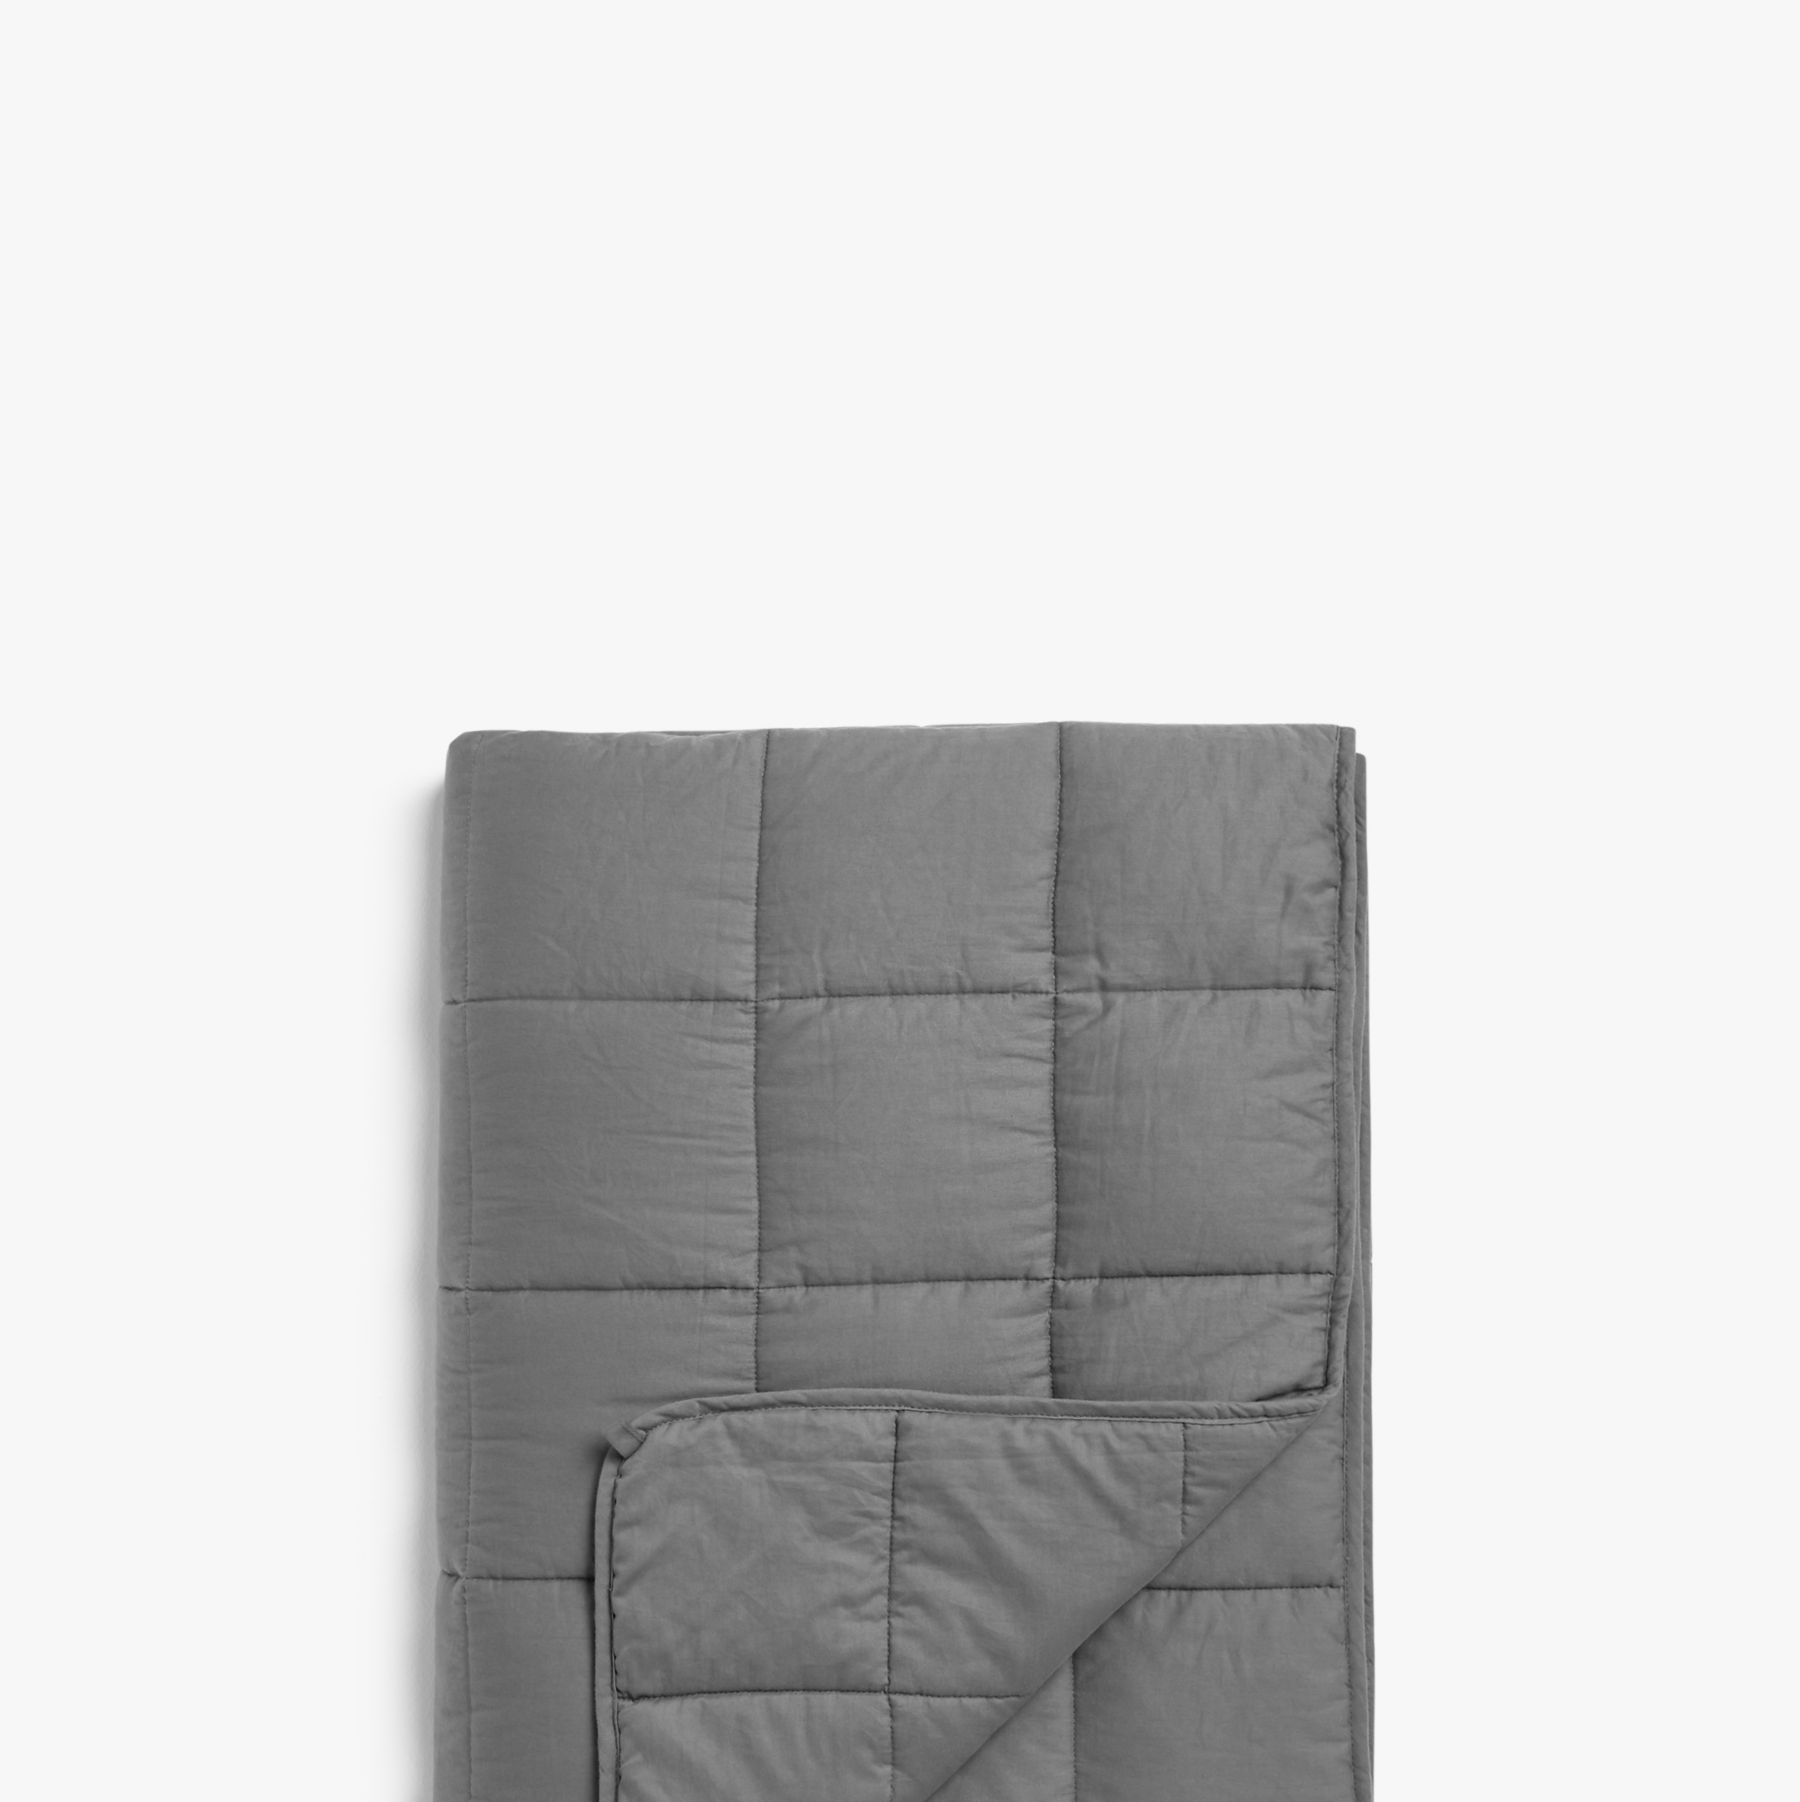 Weighted blanket - the new John Lewis weighted blanket review